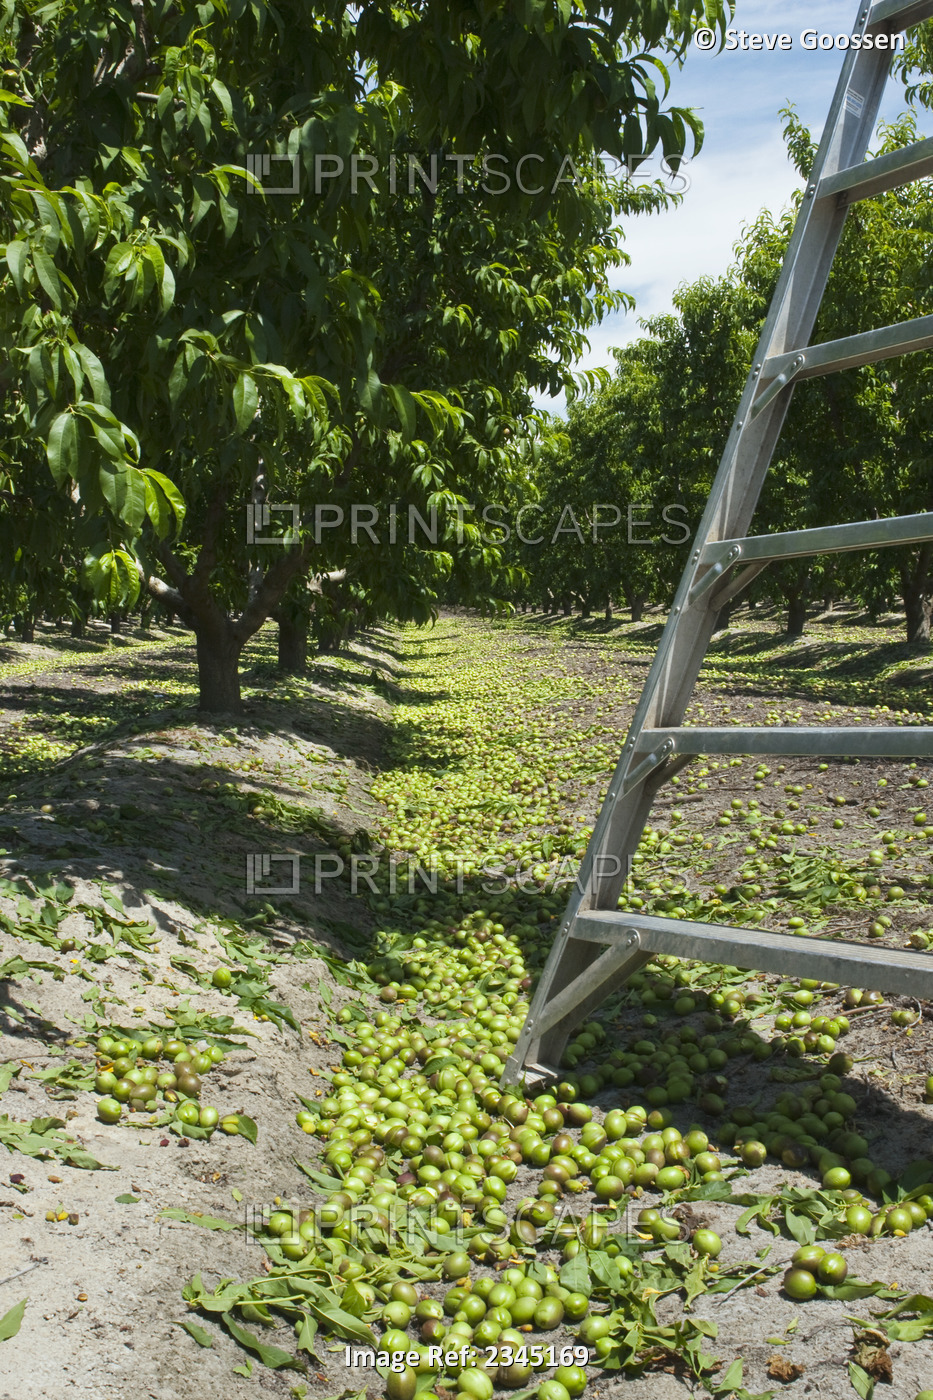 Agriculture - Immature nectarines on the orchard floor after thinning in ...